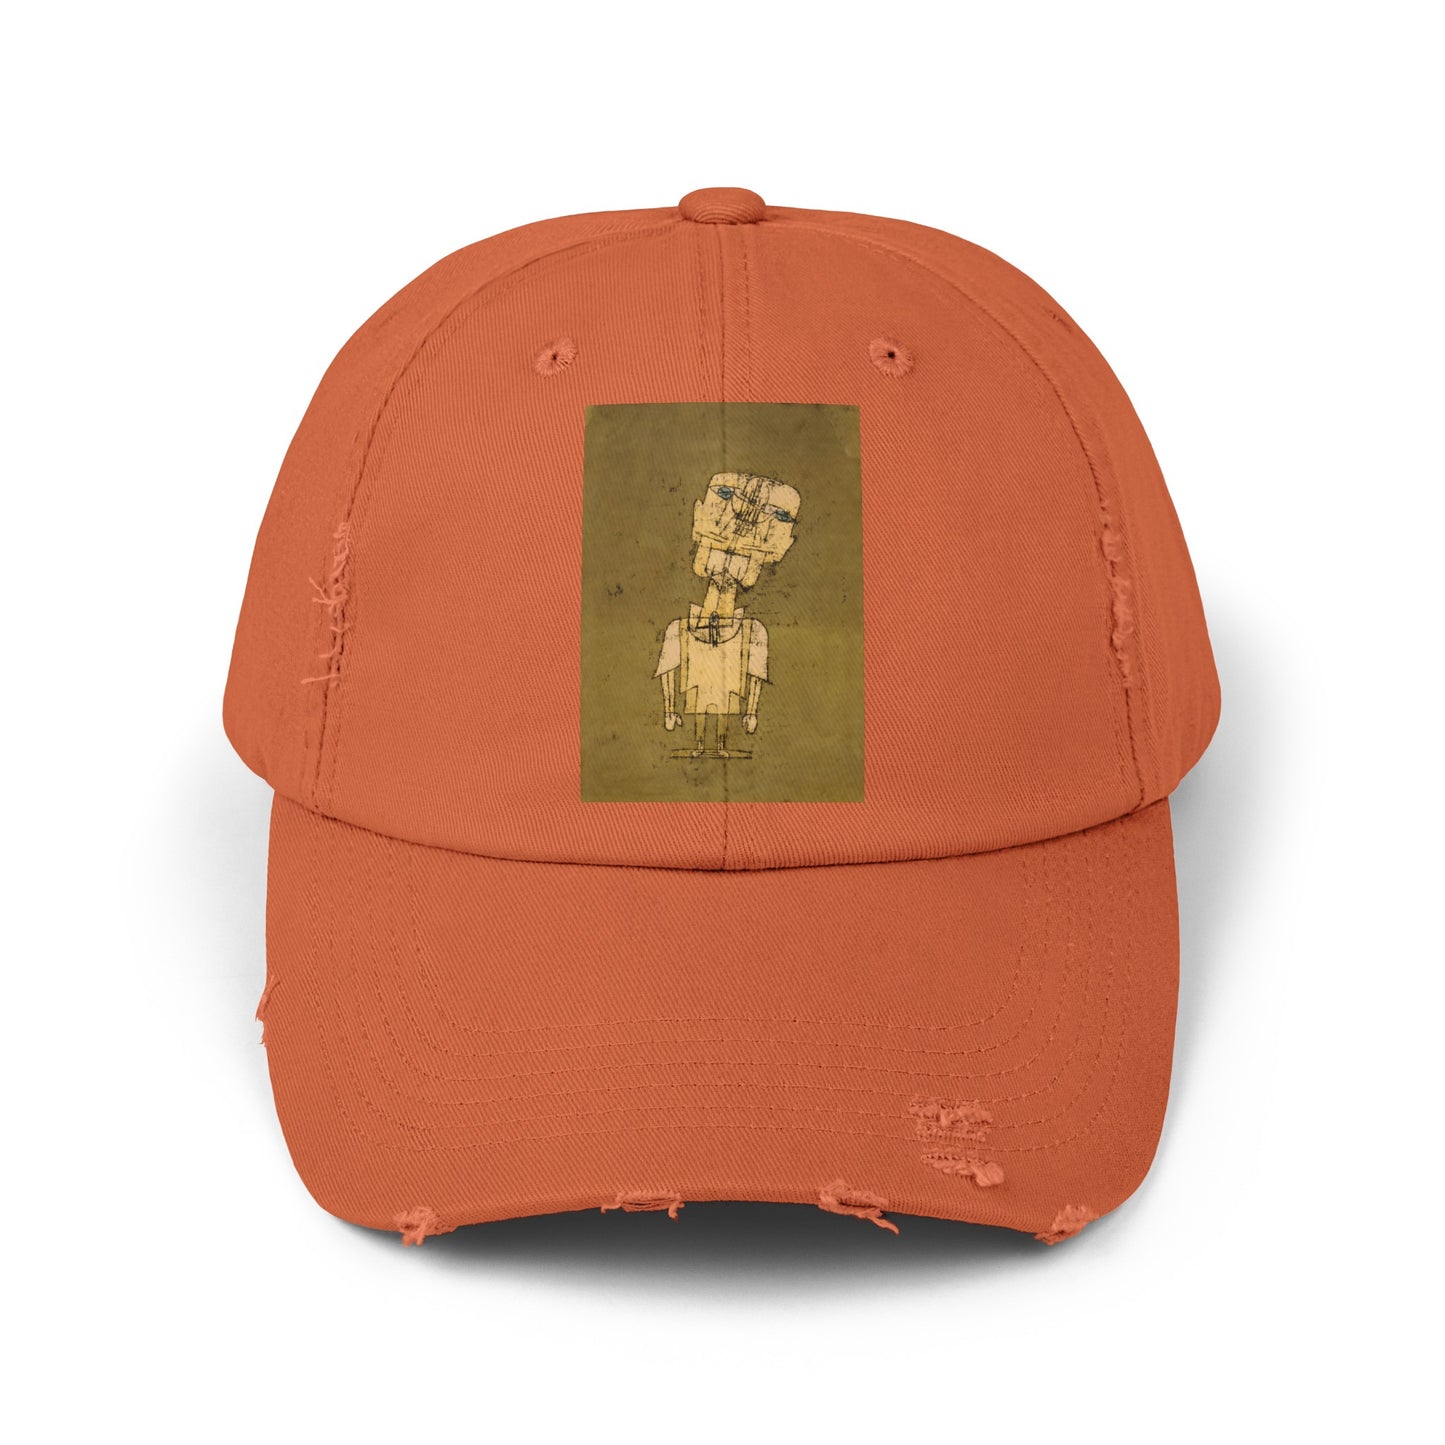 an orange baseball cap with a picture of a man on it